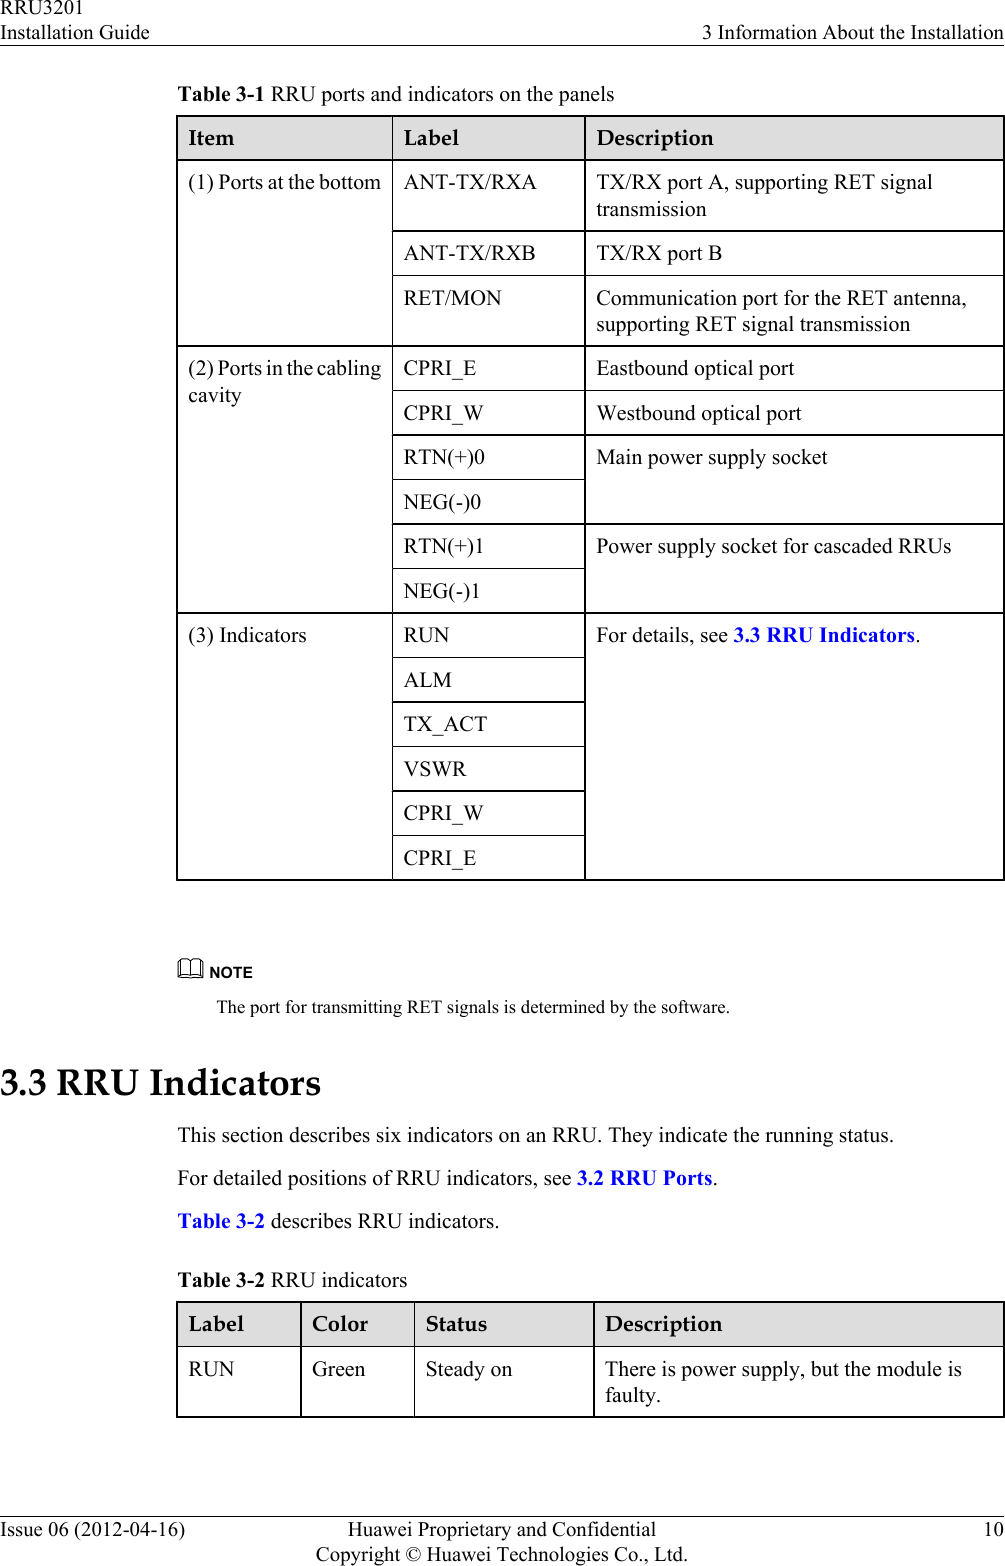 Table 3-1 RRU ports and indicators on the panelsItem Label Description(1) Ports at the bottom ANT-TX/RXA TX/RX port A, supporting RET signaltransmissionANT-TX/RXB TX/RX port BRET/MON Communication port for the RET antenna,supporting RET signal transmission(2) Ports in the cablingcavityCPRI_E Eastbound optical portCPRI_W Westbound optical portRTN(+)0 Main power supply socketNEG(-)0RTN(+)1 Power supply socket for cascaded RRUsNEG(-)1(3) Indicators RUN For details, see 3.3 RRU Indicators.ALMTX_ACTVSWRCPRI_WCPRI_E NOTEThe port for transmitting RET signals is determined by the software.3.3 RRU IndicatorsThis section describes six indicators on an RRU. They indicate the running status.For detailed positions of RRU indicators, see 3.2 RRU Ports.Table 3-2 describes RRU indicators.Table 3-2 RRU indicatorsLabel Color Status DescriptionRUN Green Steady on There is power supply, but the module isfaulty.RRU3201Installation Guide 3 Information About the InstallationIssue 06 (2012-04-16) Huawei Proprietary and ConfidentialCopyright © Huawei Technologies Co., Ltd.10